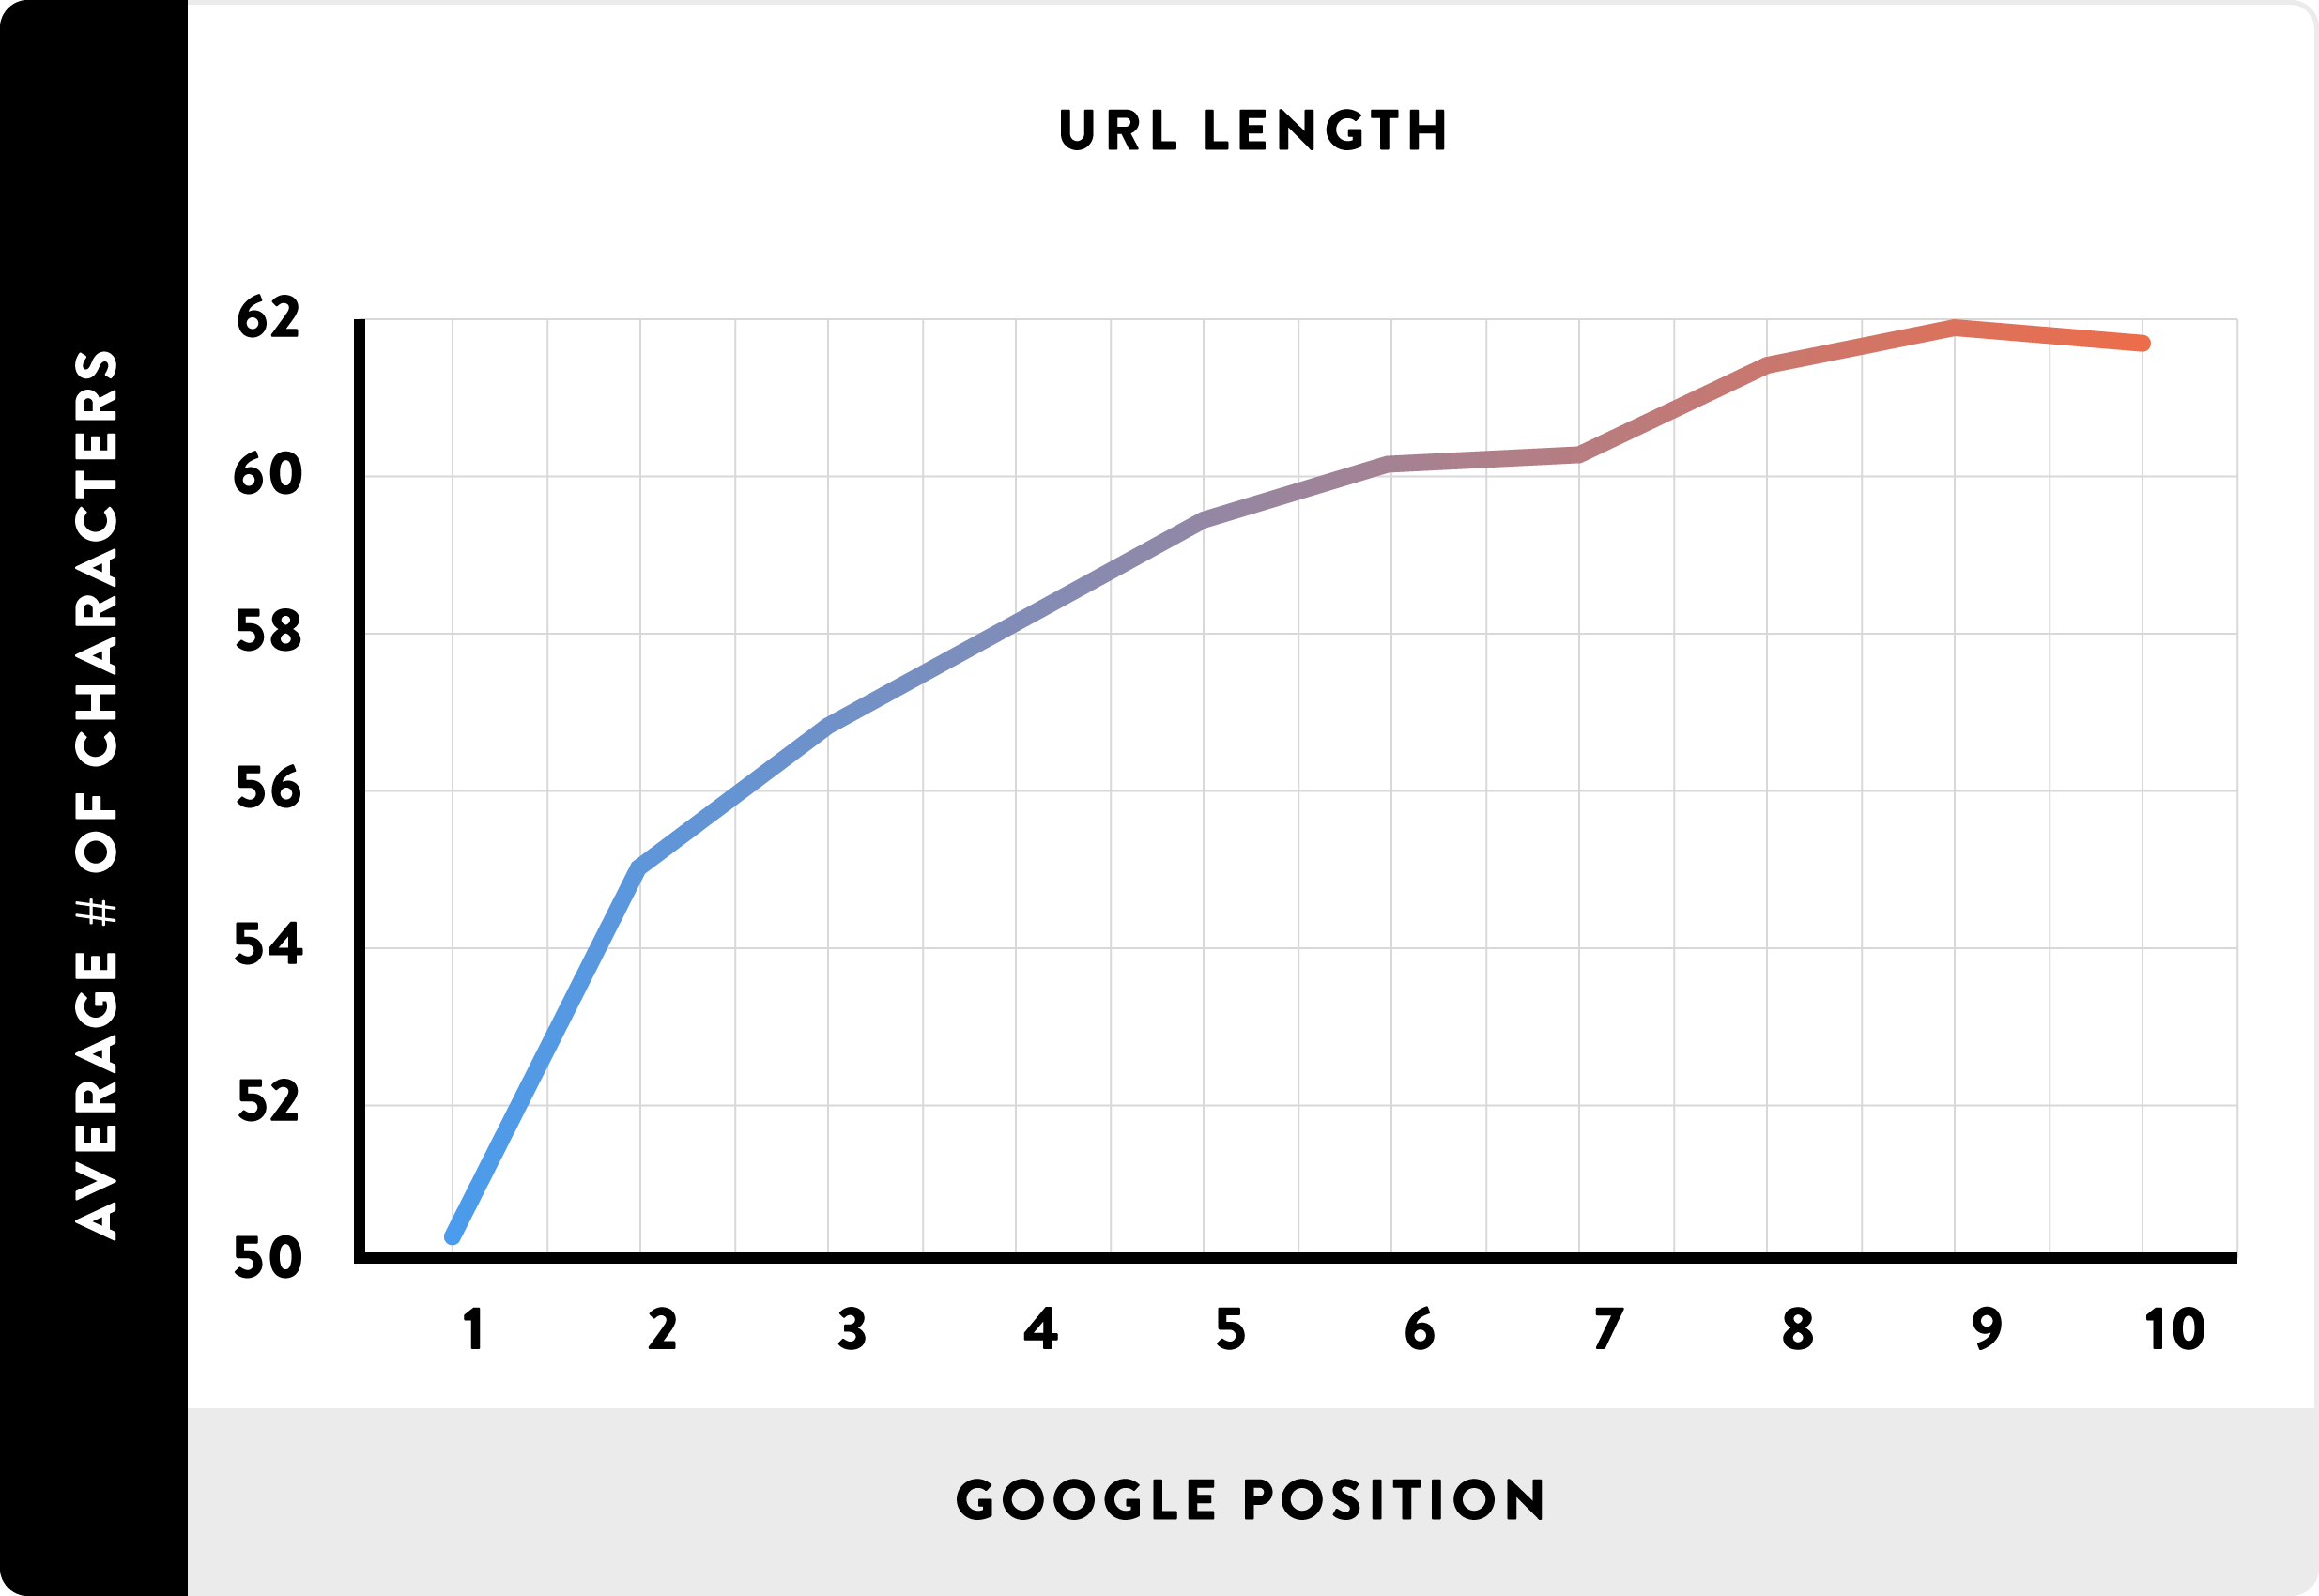 Shorter URLs tend to perform best in Google search